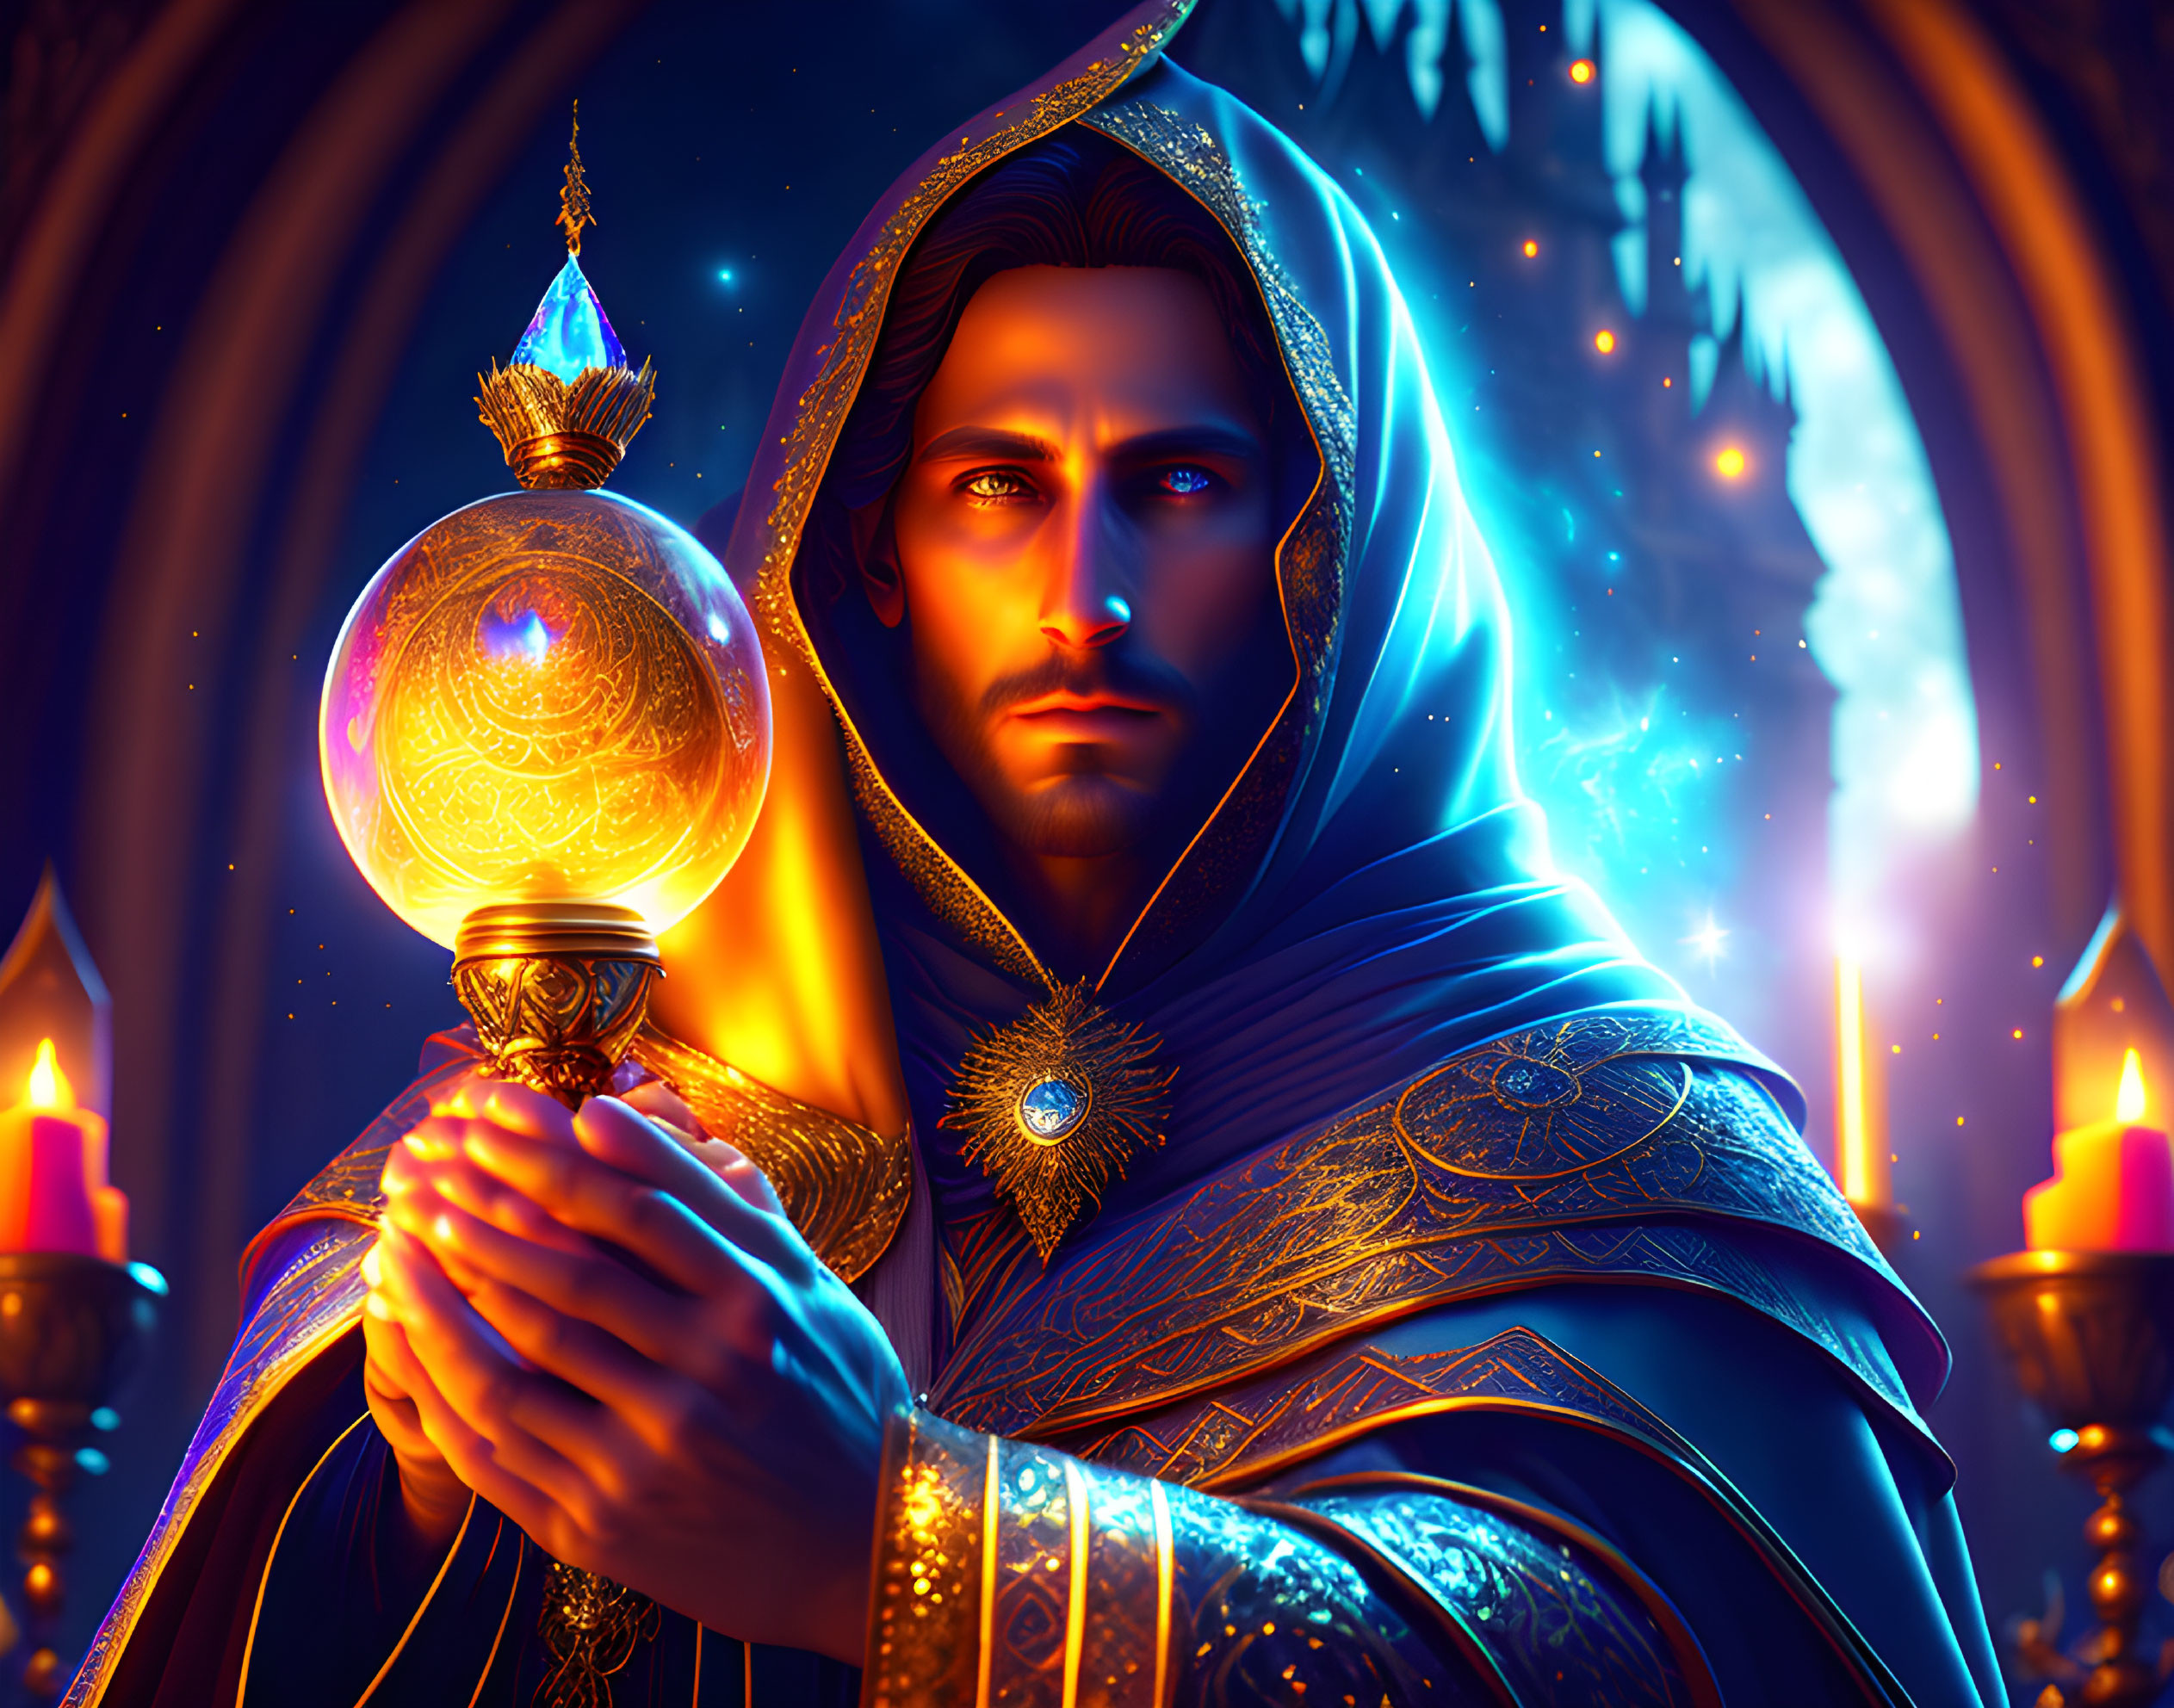 Mystical figure in blue cloak with glowing orb in ornate, candlelit room